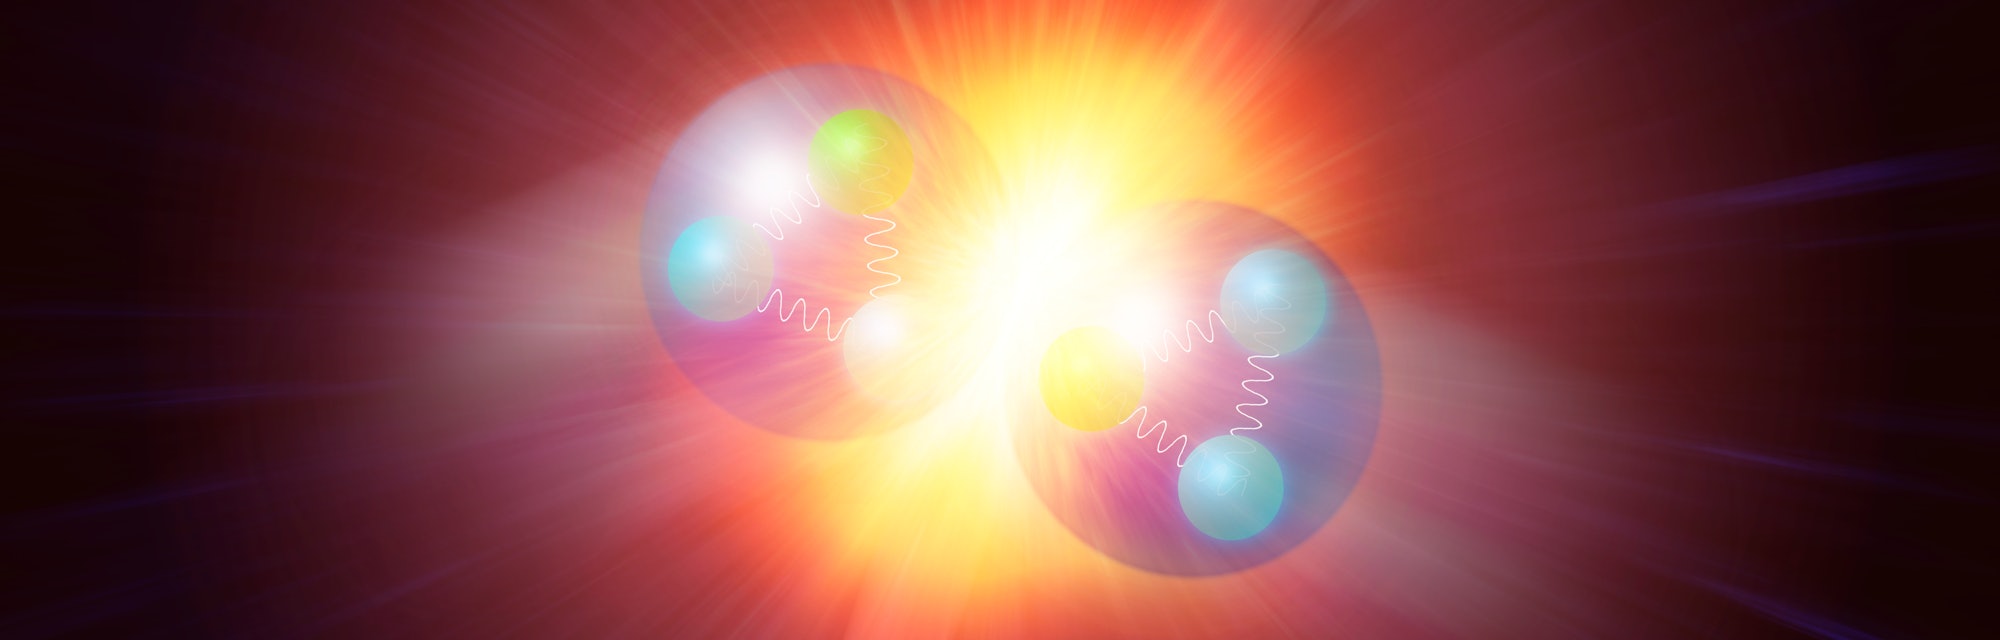 Conceptual illustration of the Higgs particle (orange, top and bottom) being produced by colliding t...